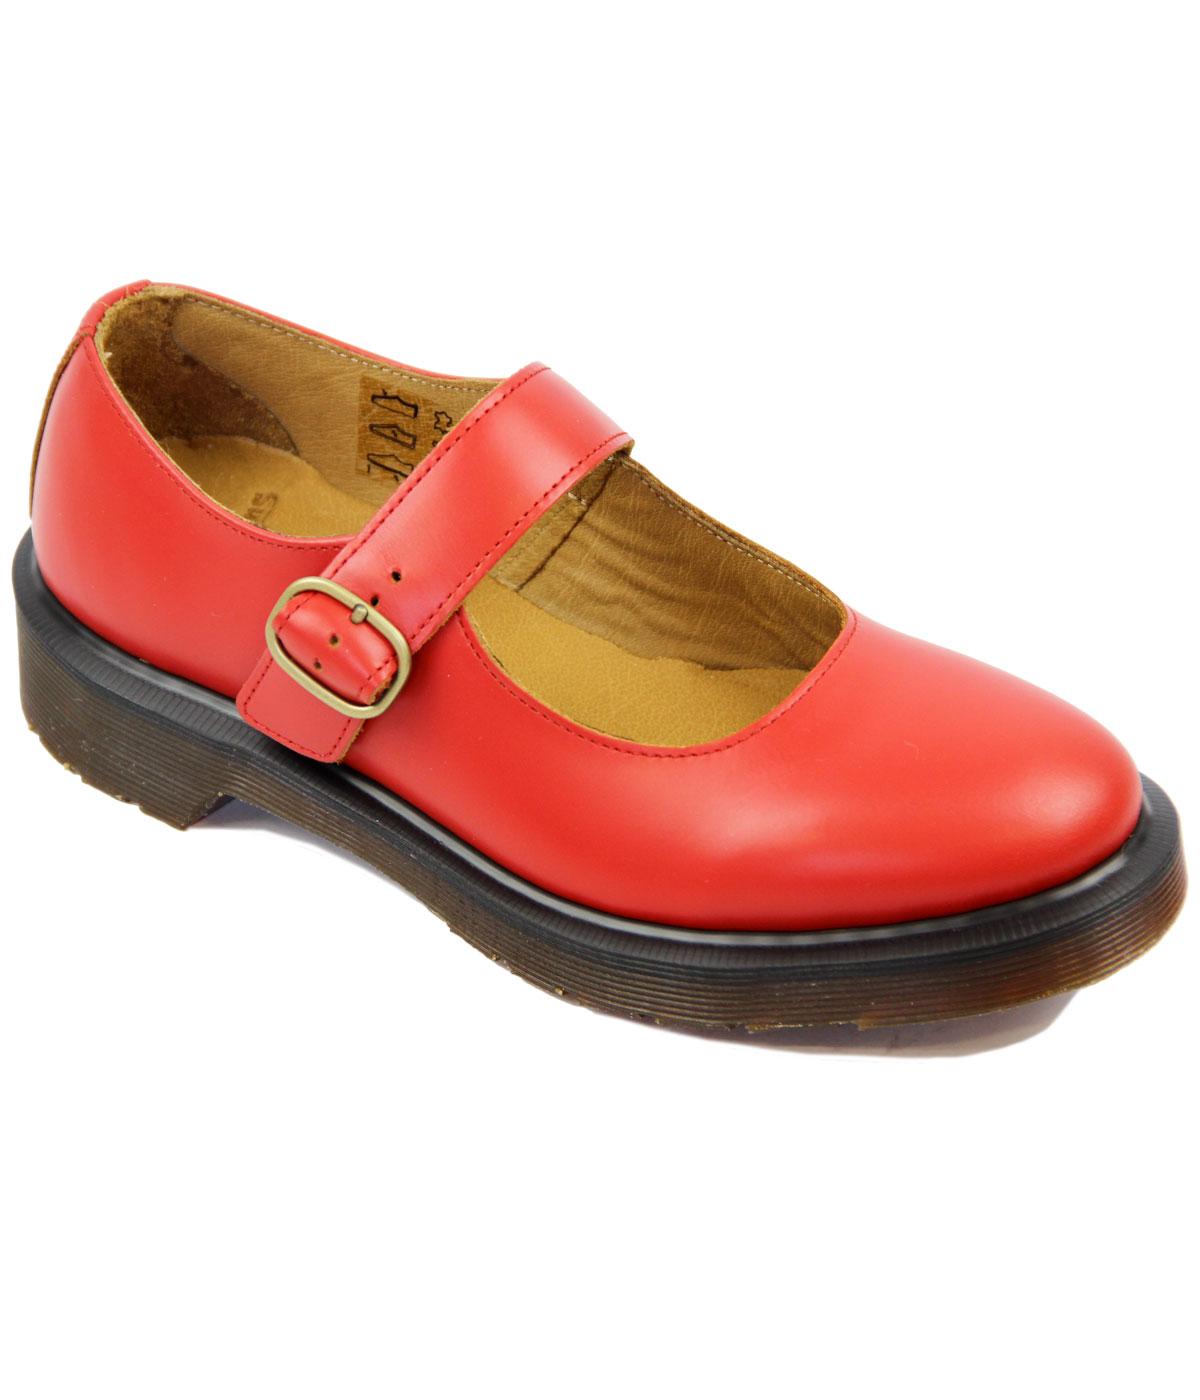 doc martin shoes red colour